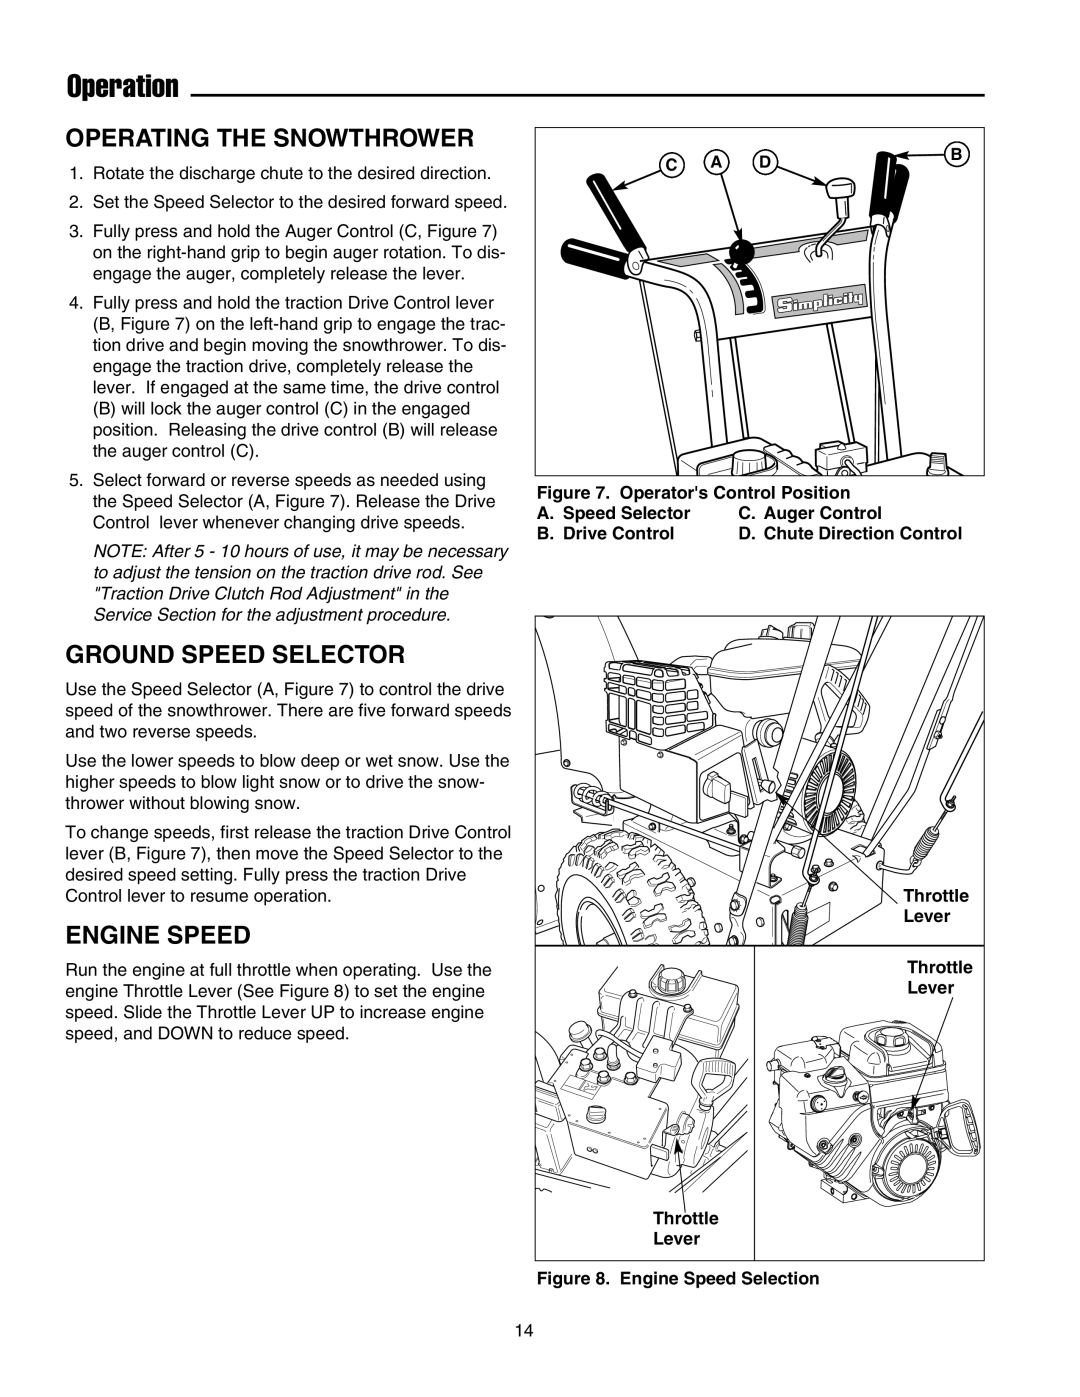 Simplicity 1694433, 755, 555, 1694434 Operating The Snowthrower, Ground Speed Selector, Engine Speed, Operation 